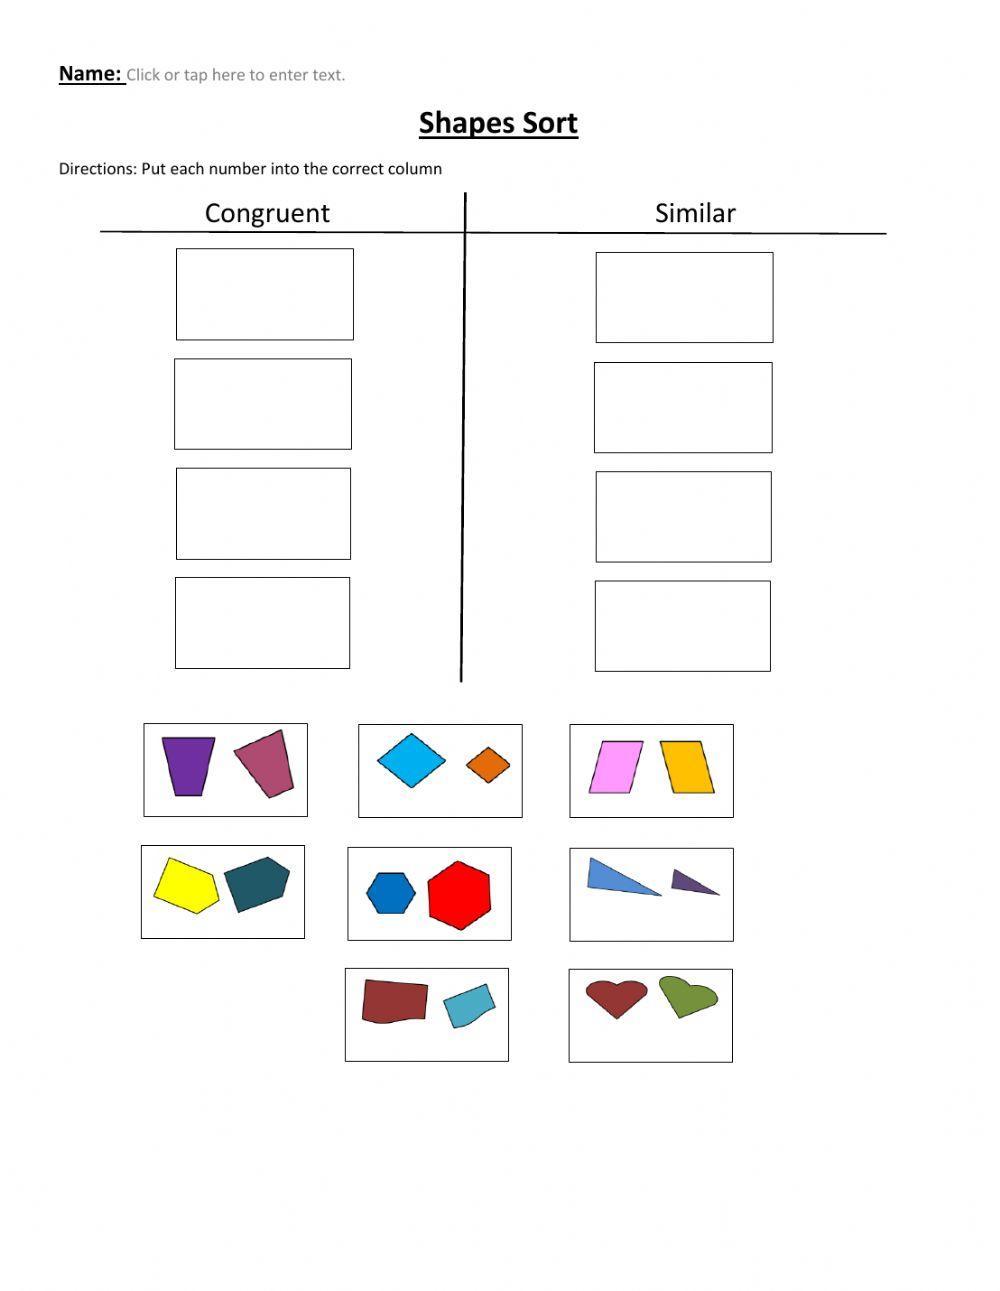 Congruent and Similar Shapes Sort